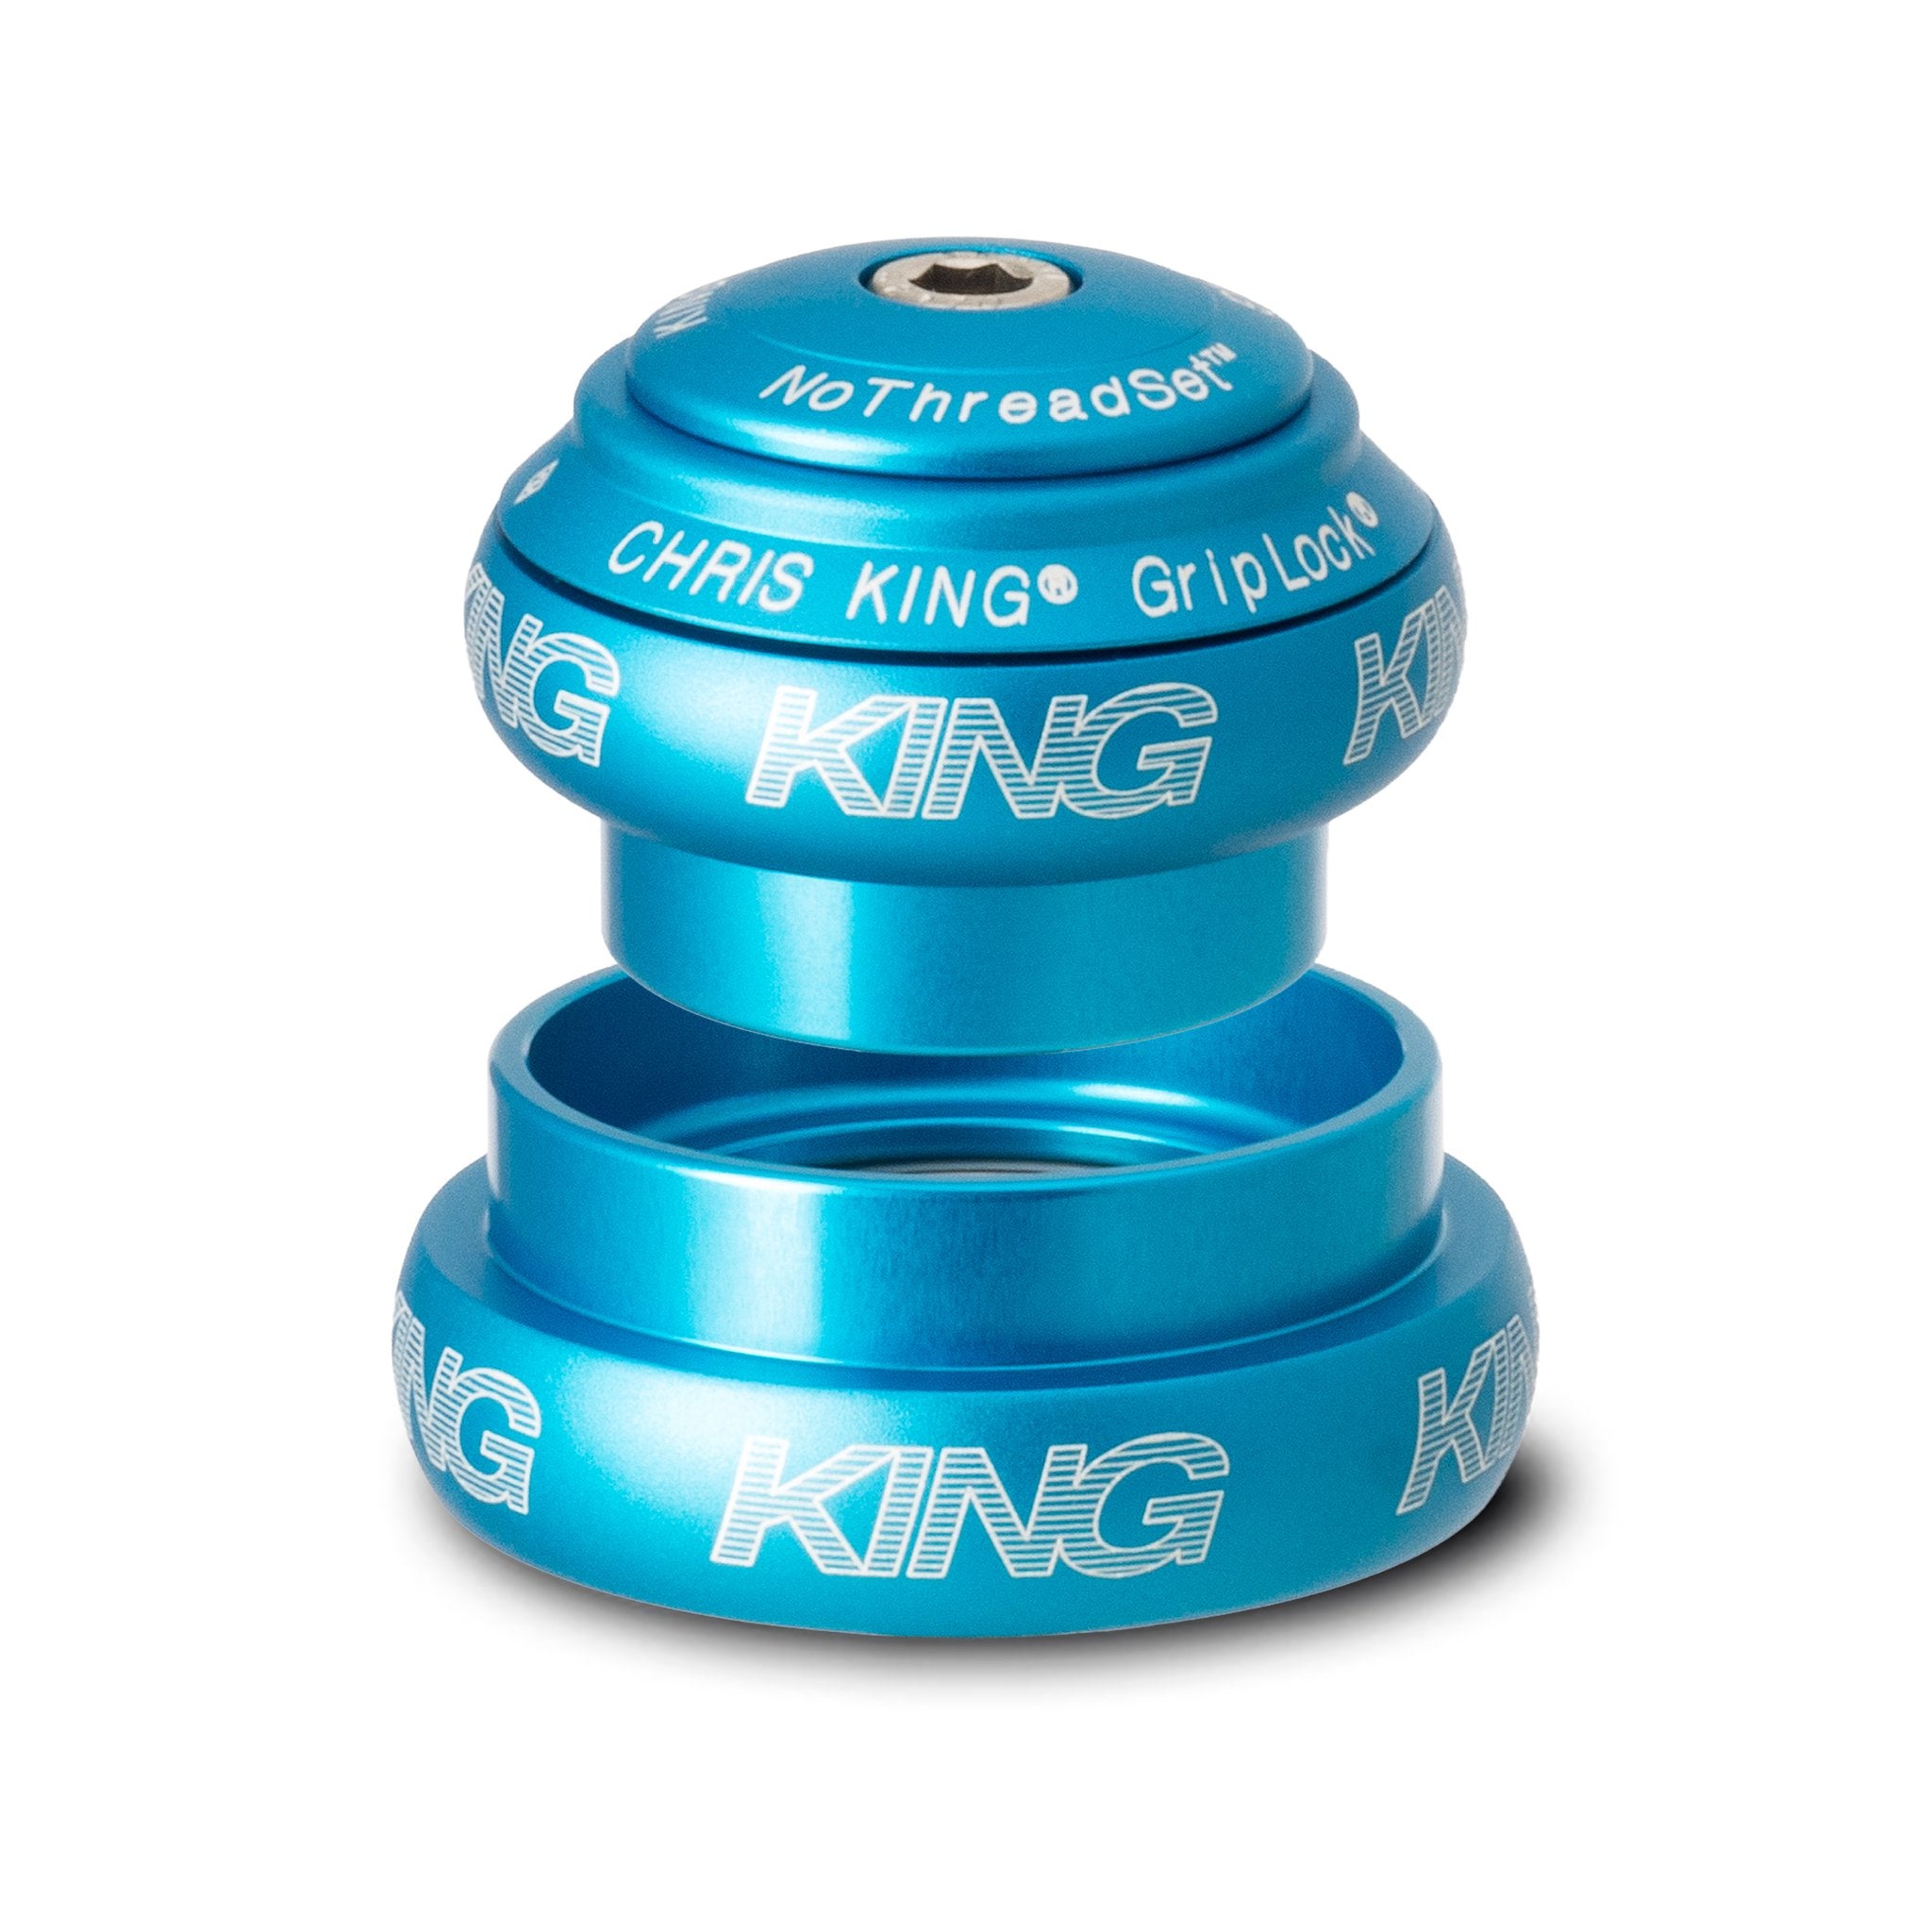 CHRIS KING NoThreadSet Tapered 1-1 / 4 "